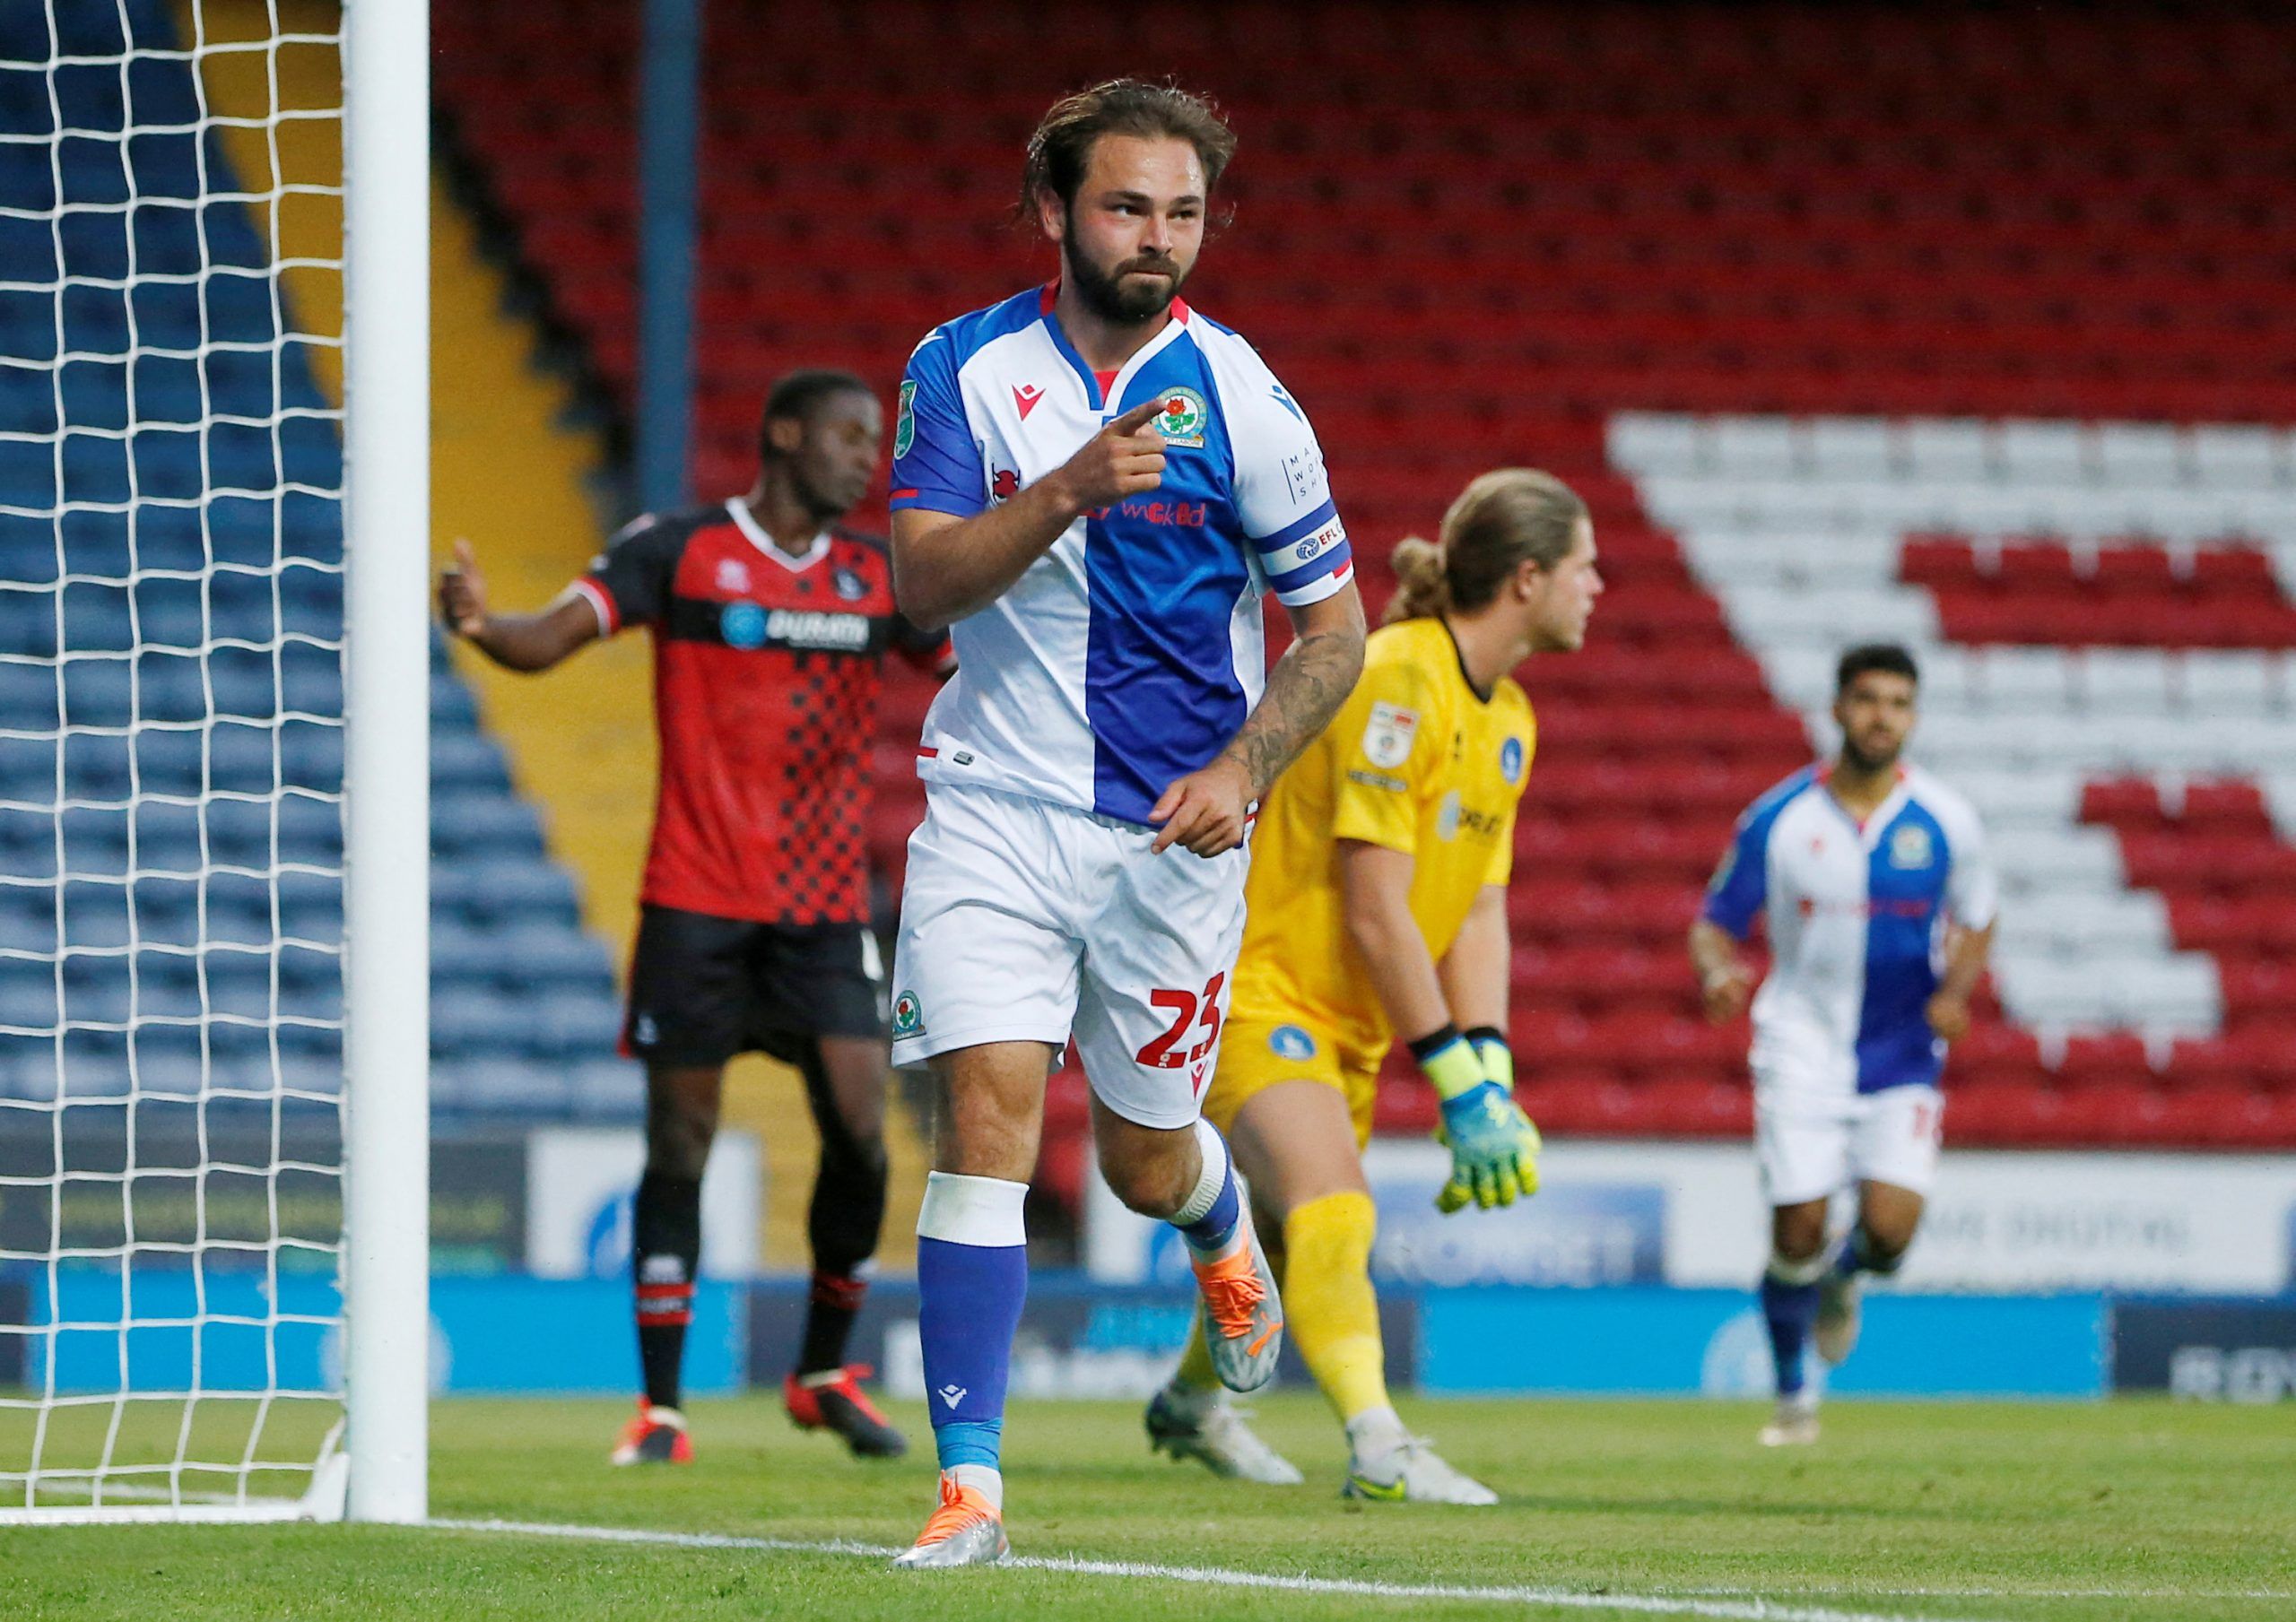 Soccer Football - Carabao Cup - Blackburn Rovers v Hartlepool United - Ewood Park, Blackburn, Britain - August 10, 2022 Blackburn Rovers' Bradley Dack celebrates scoring their second goal Action Images/Ed Sykes  EDITORIAL USE ONLY. No use with unauthorized audio, video, data, fixture lists, club/league logos or 